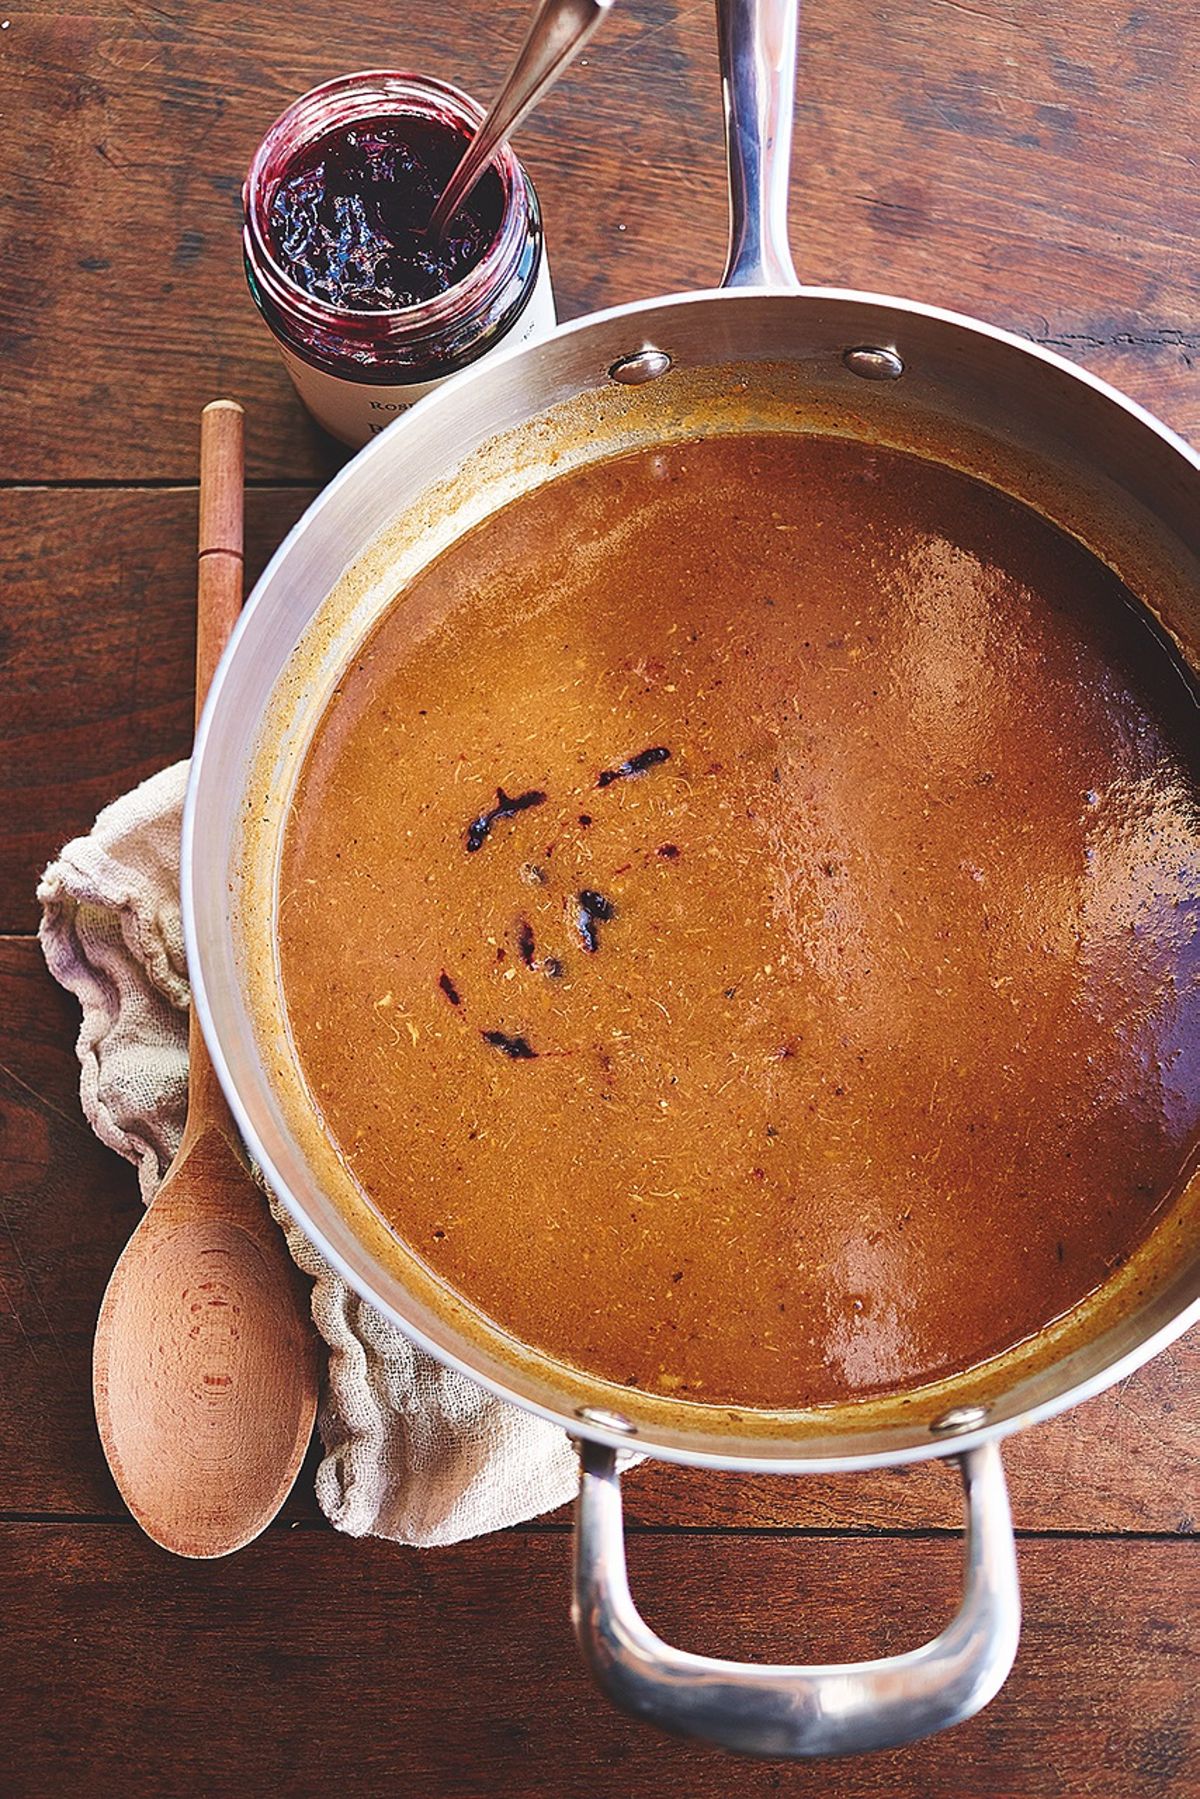 Get-ahead Gravy Perfect for Your Big-day Turkey